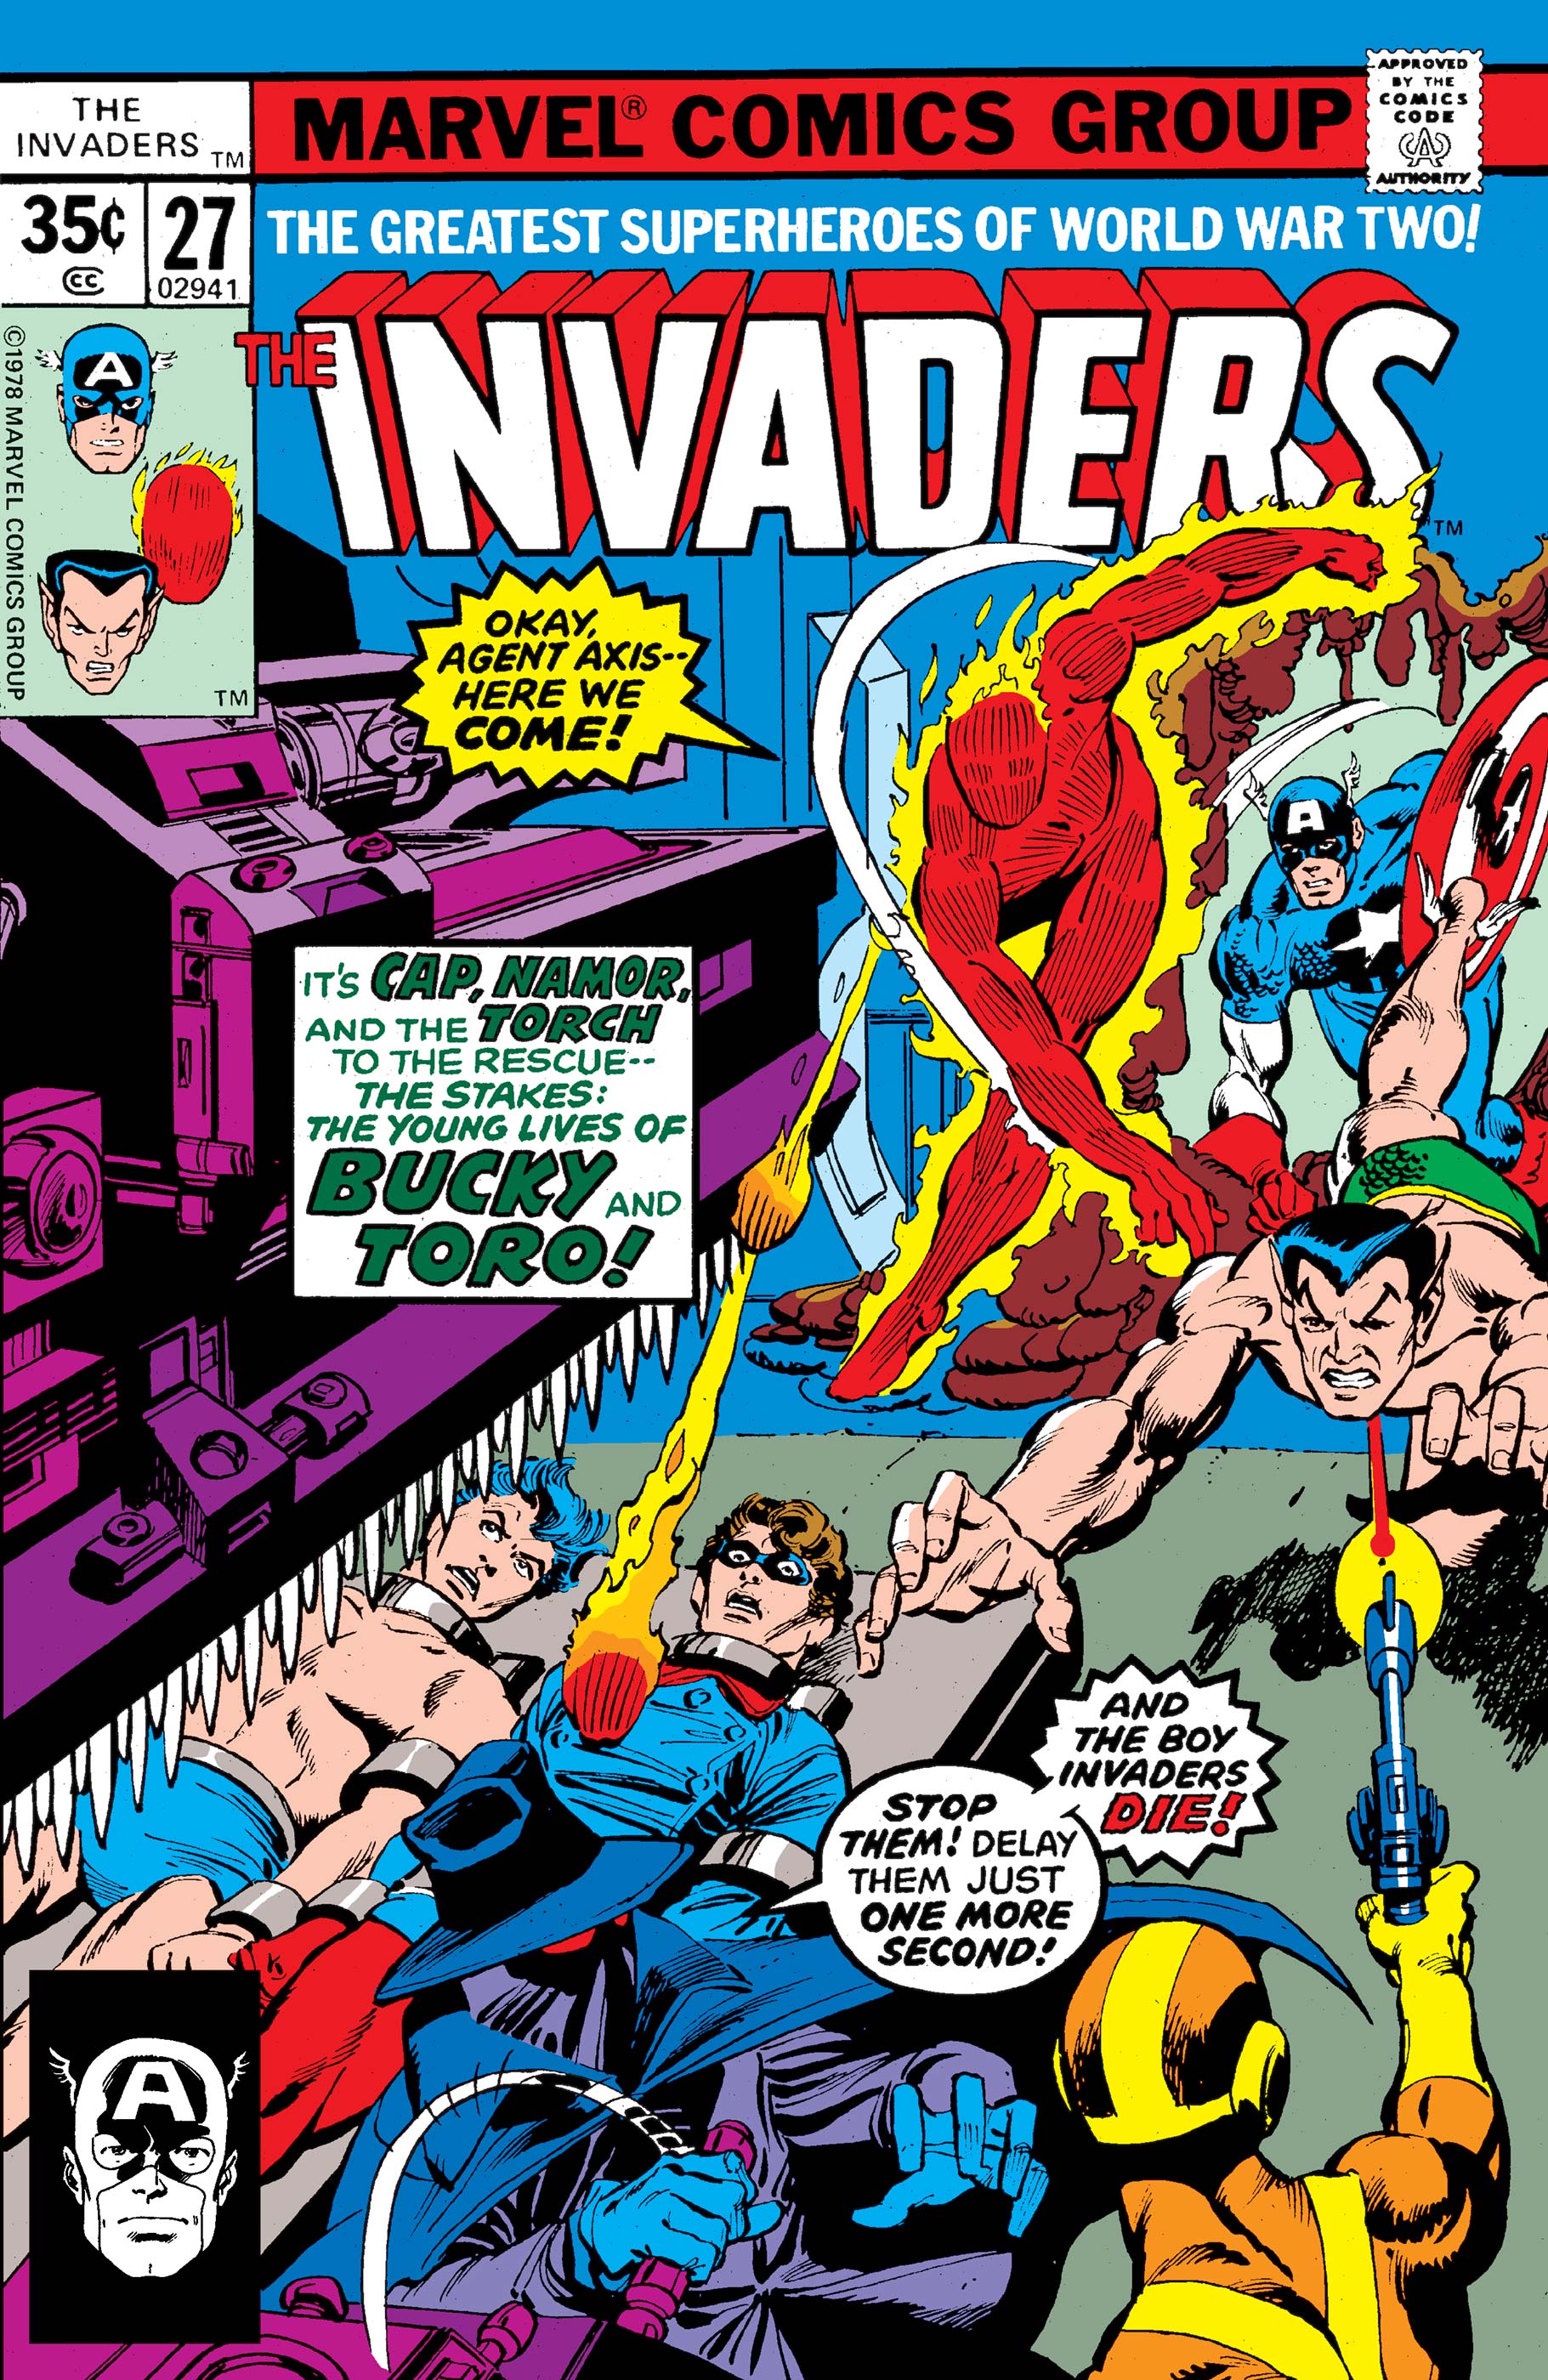 Invaders (1975) #27